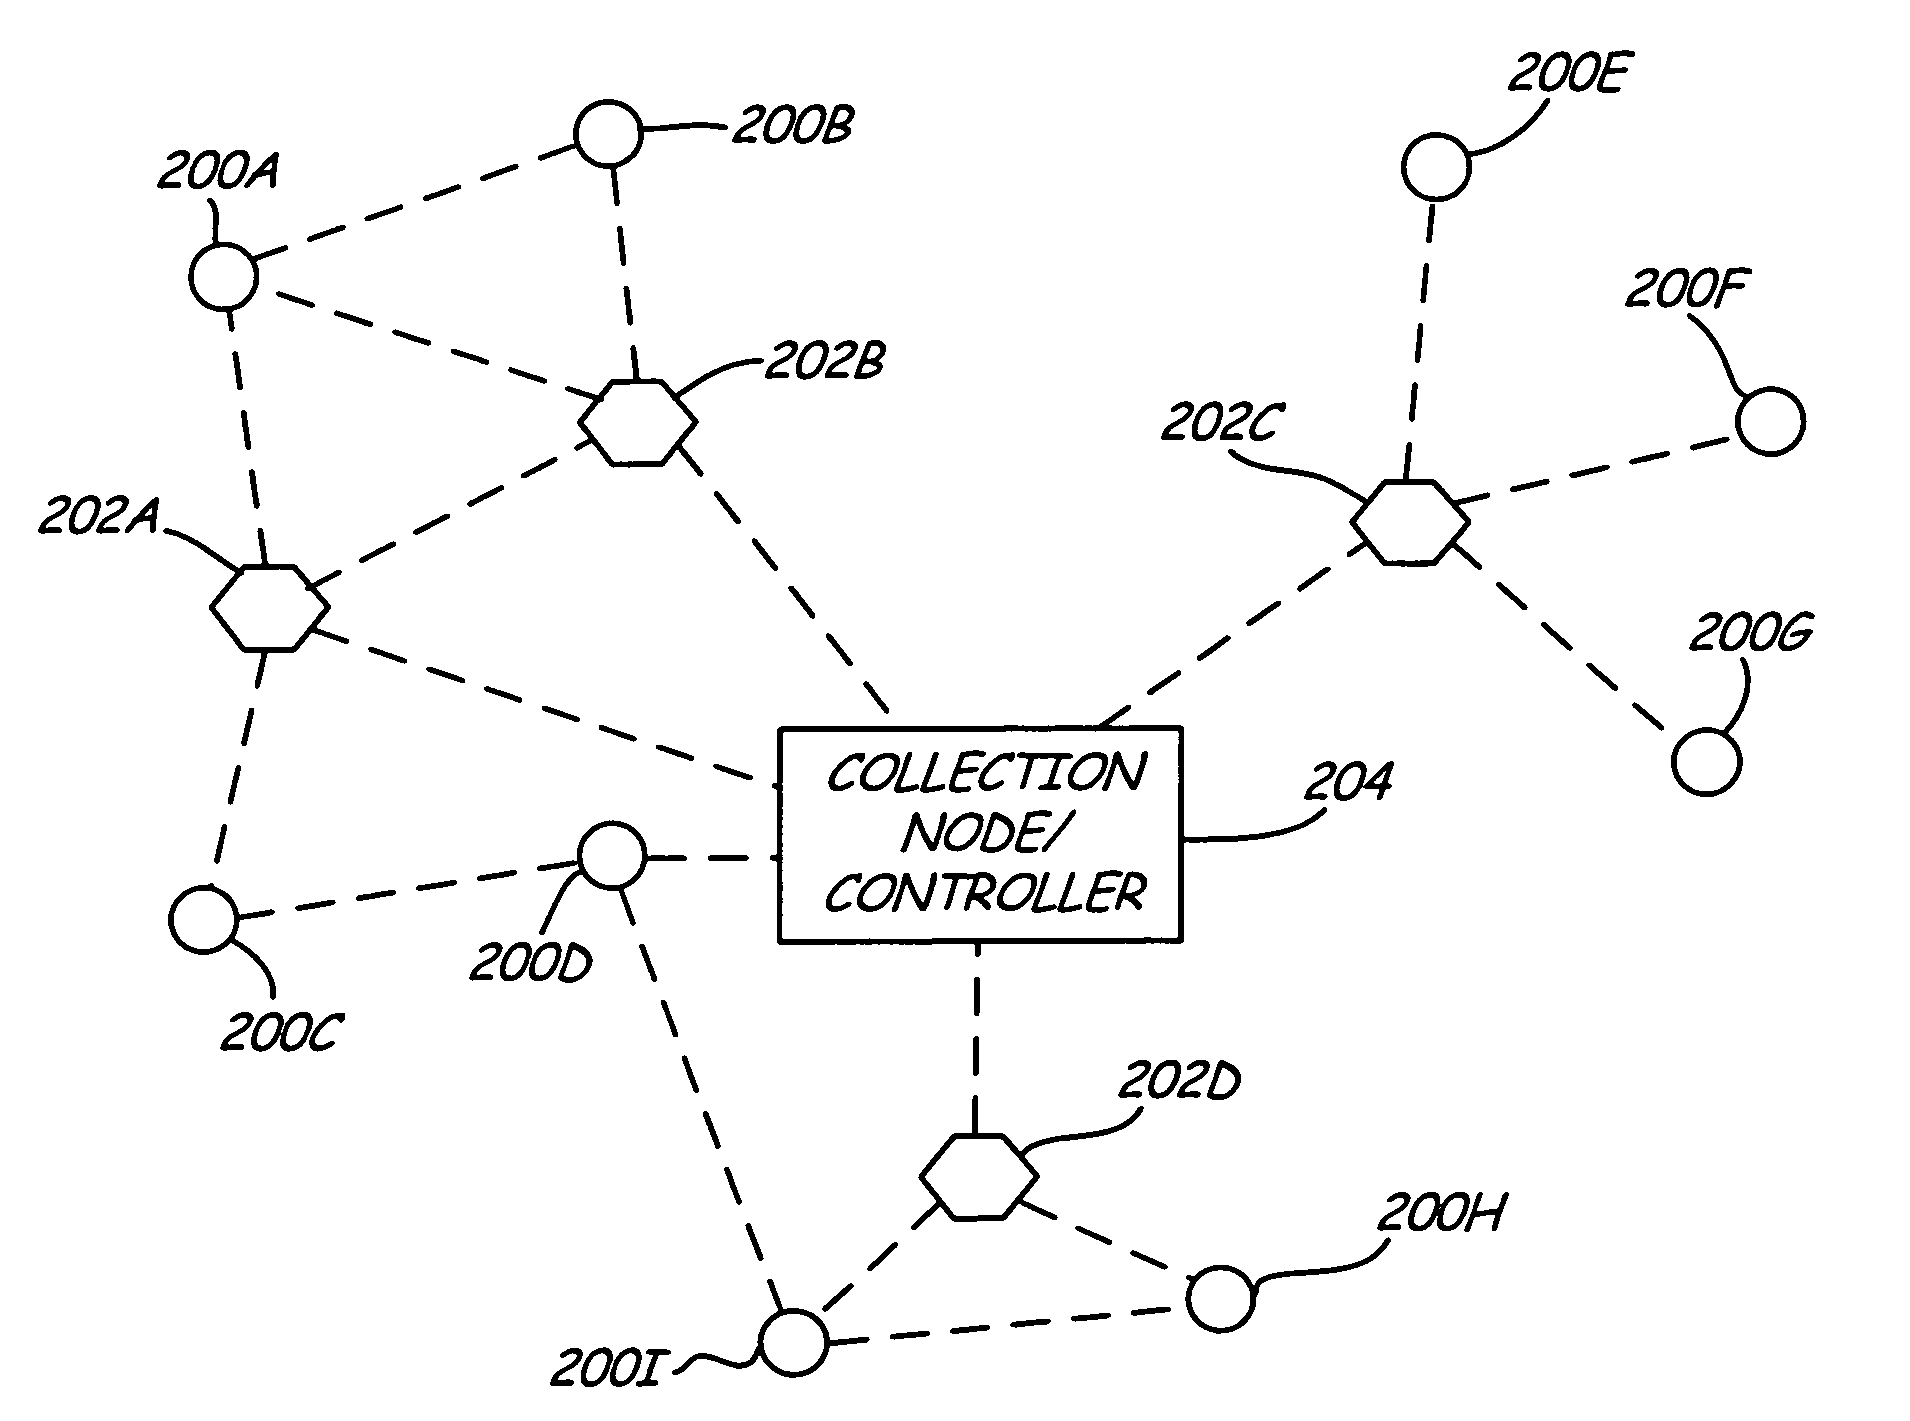 Self powered son device network